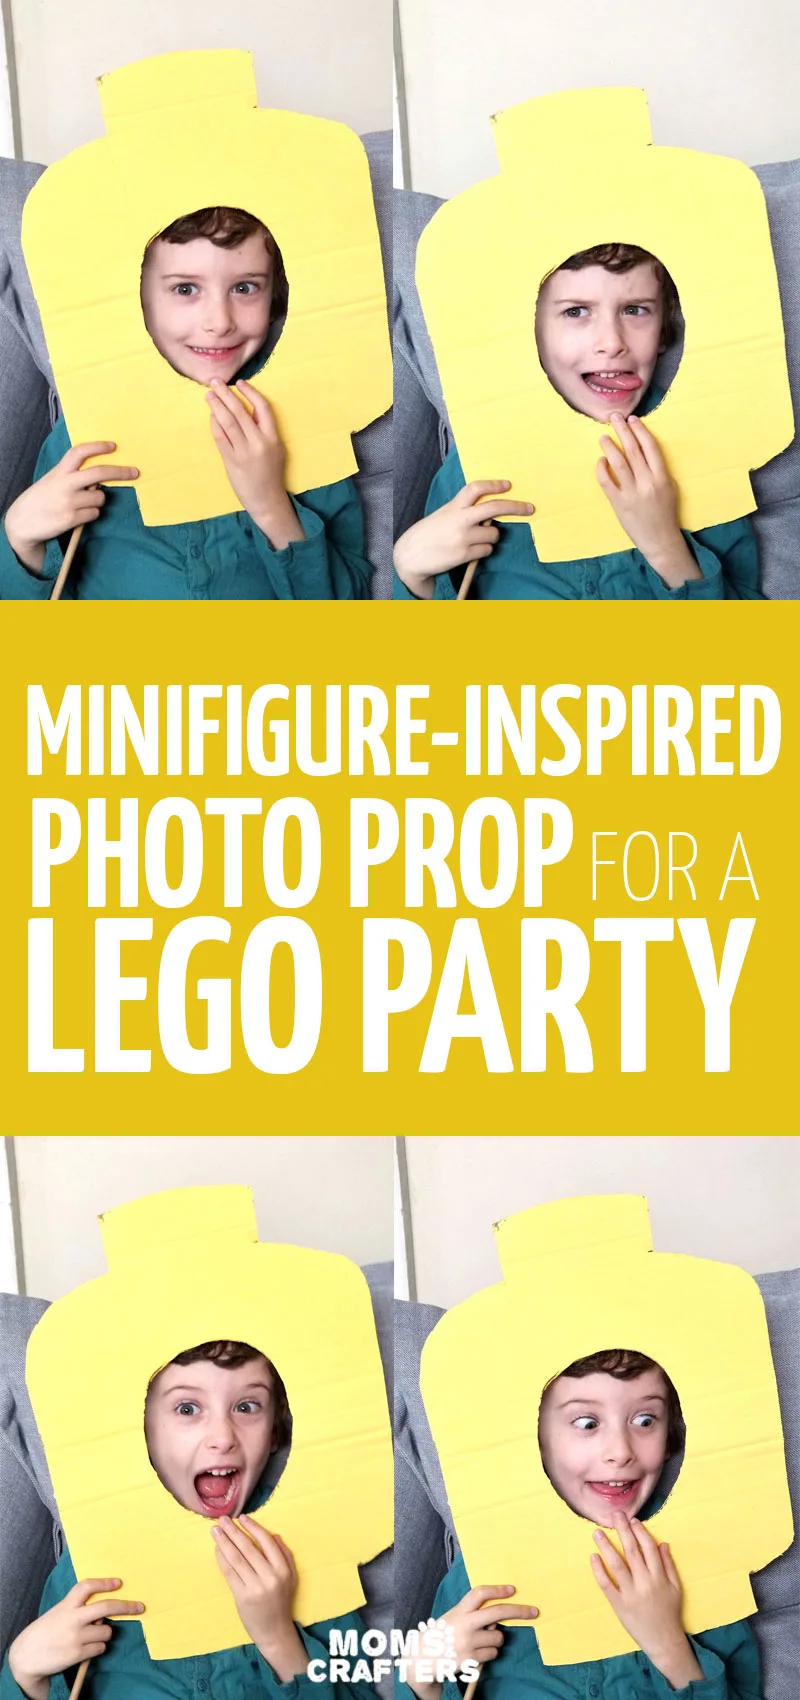 Make LEGO photo props for your next LEGO themed birthday party! This fun minifigure-inspired photo booth idea is made from upcycled cardboard boxes and is super easy to craft.